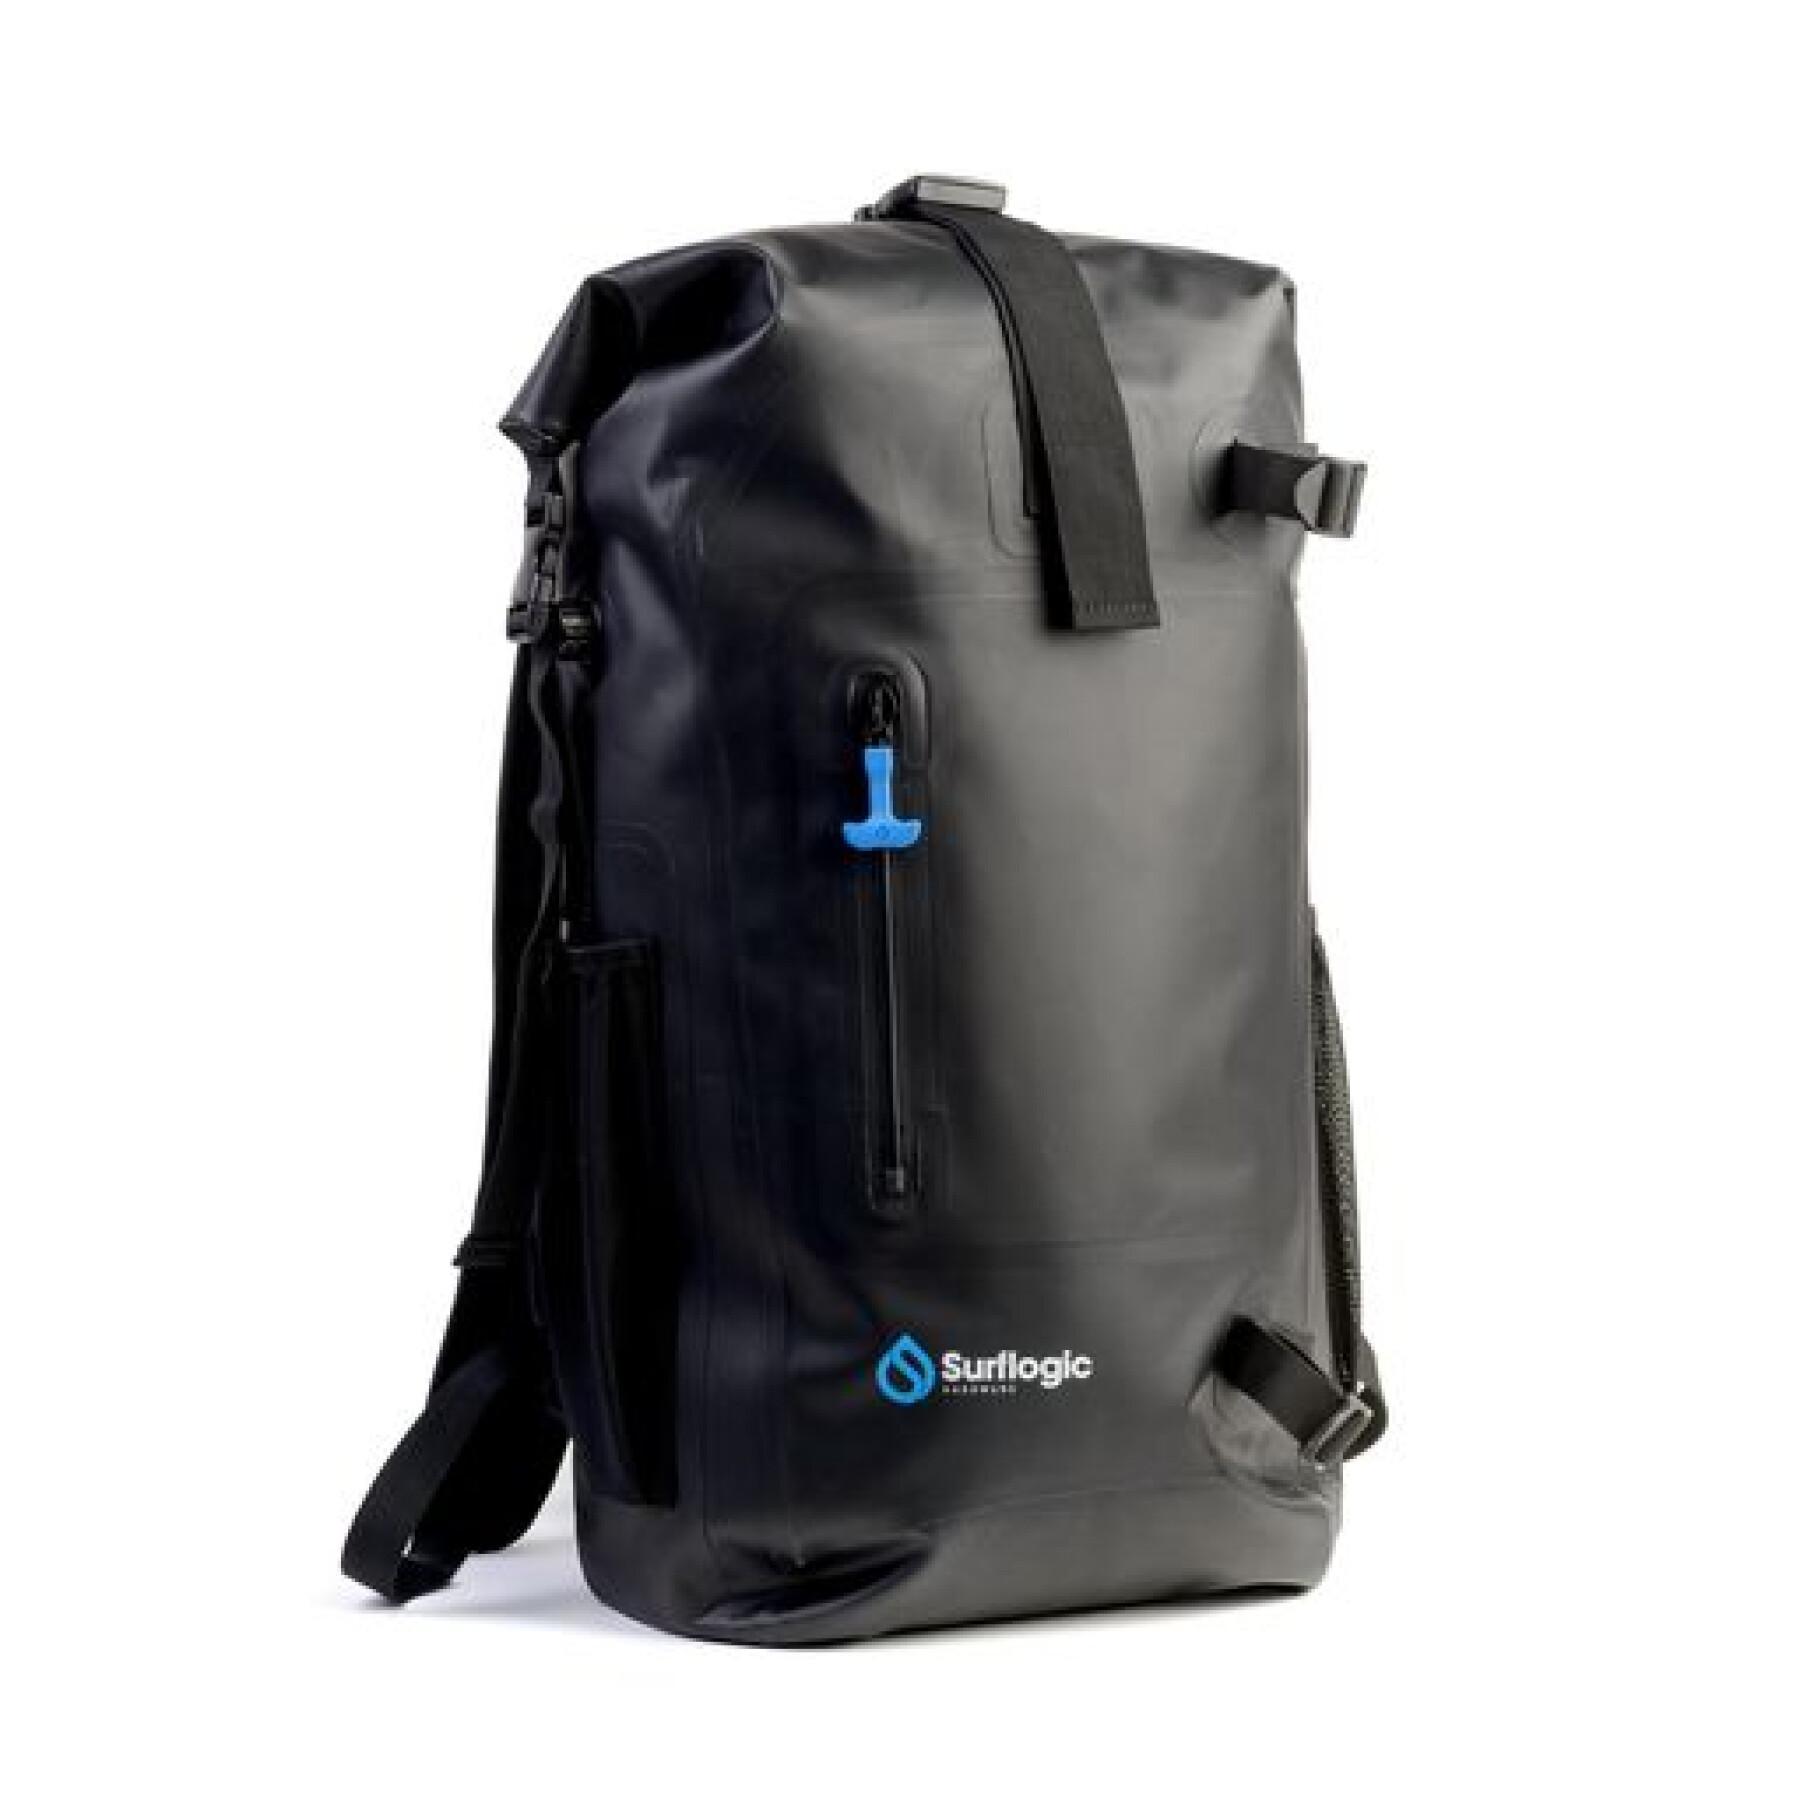 Waterproof backpack Surflogic Expedition-dry